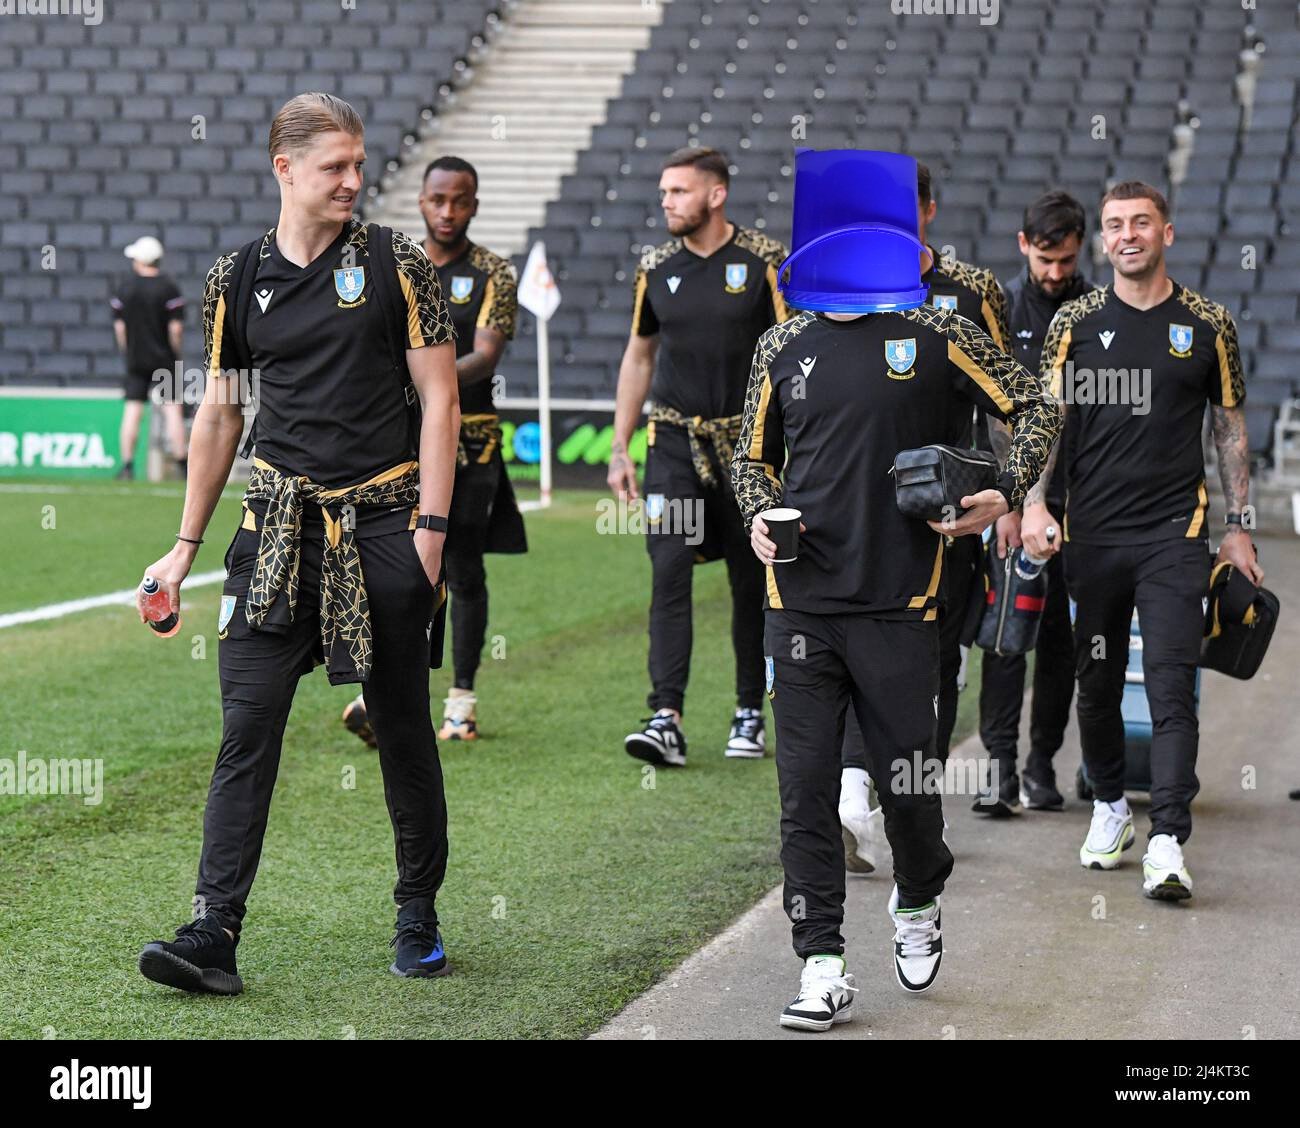 the-sheffield-wednesday-players-arrive-at-stadium-mk-for-their-game-against-milton-keynes-dons-2J4KT3C.jpg